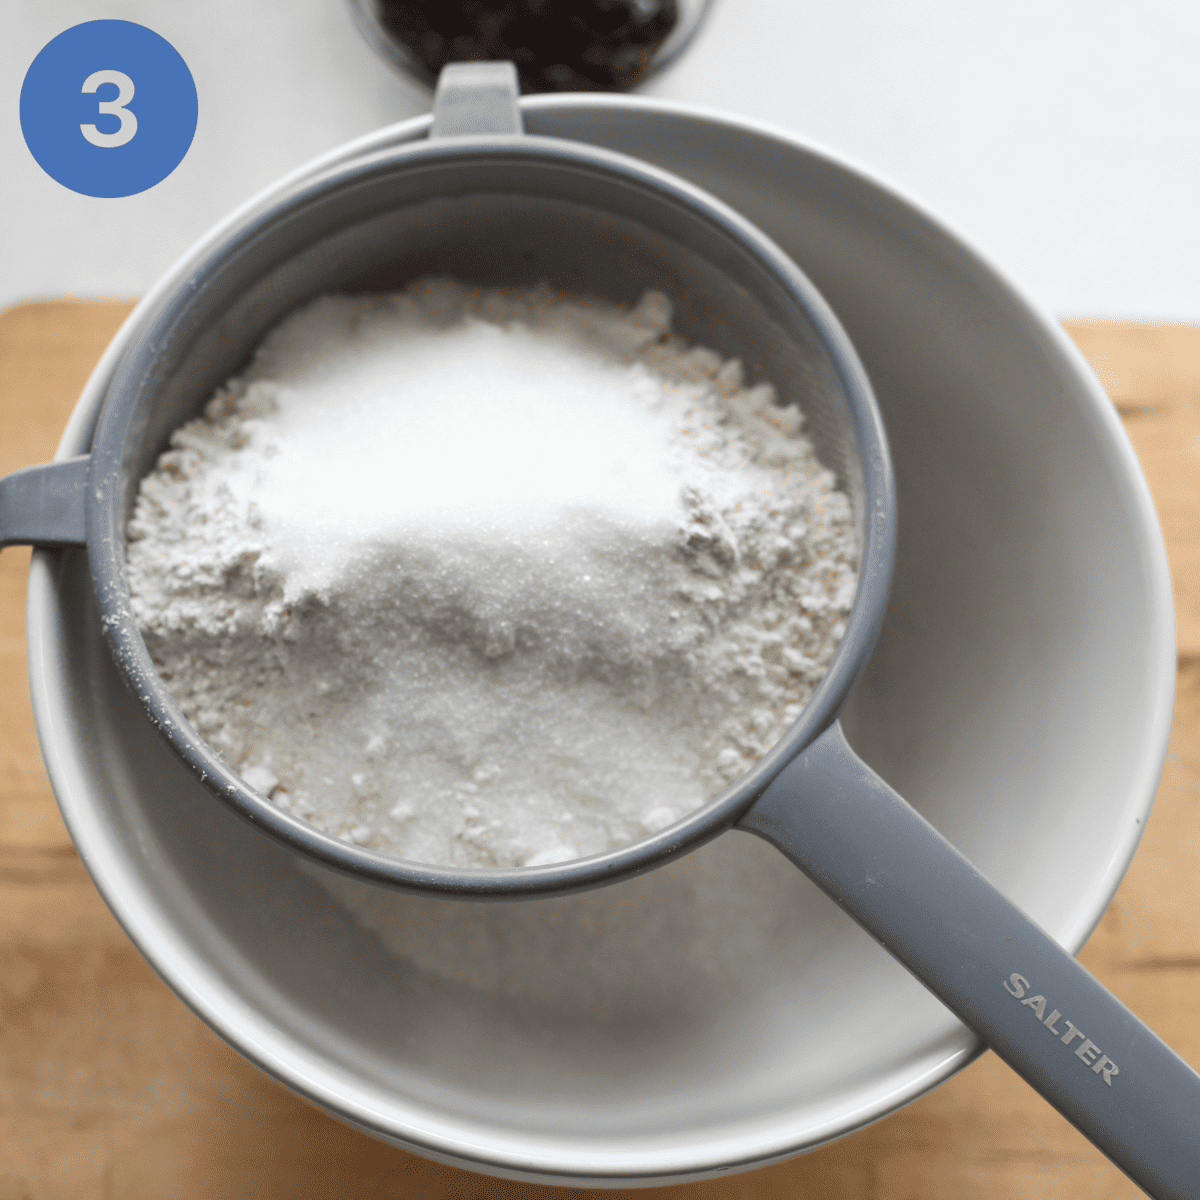 Sifting flour into a mixing bowl.